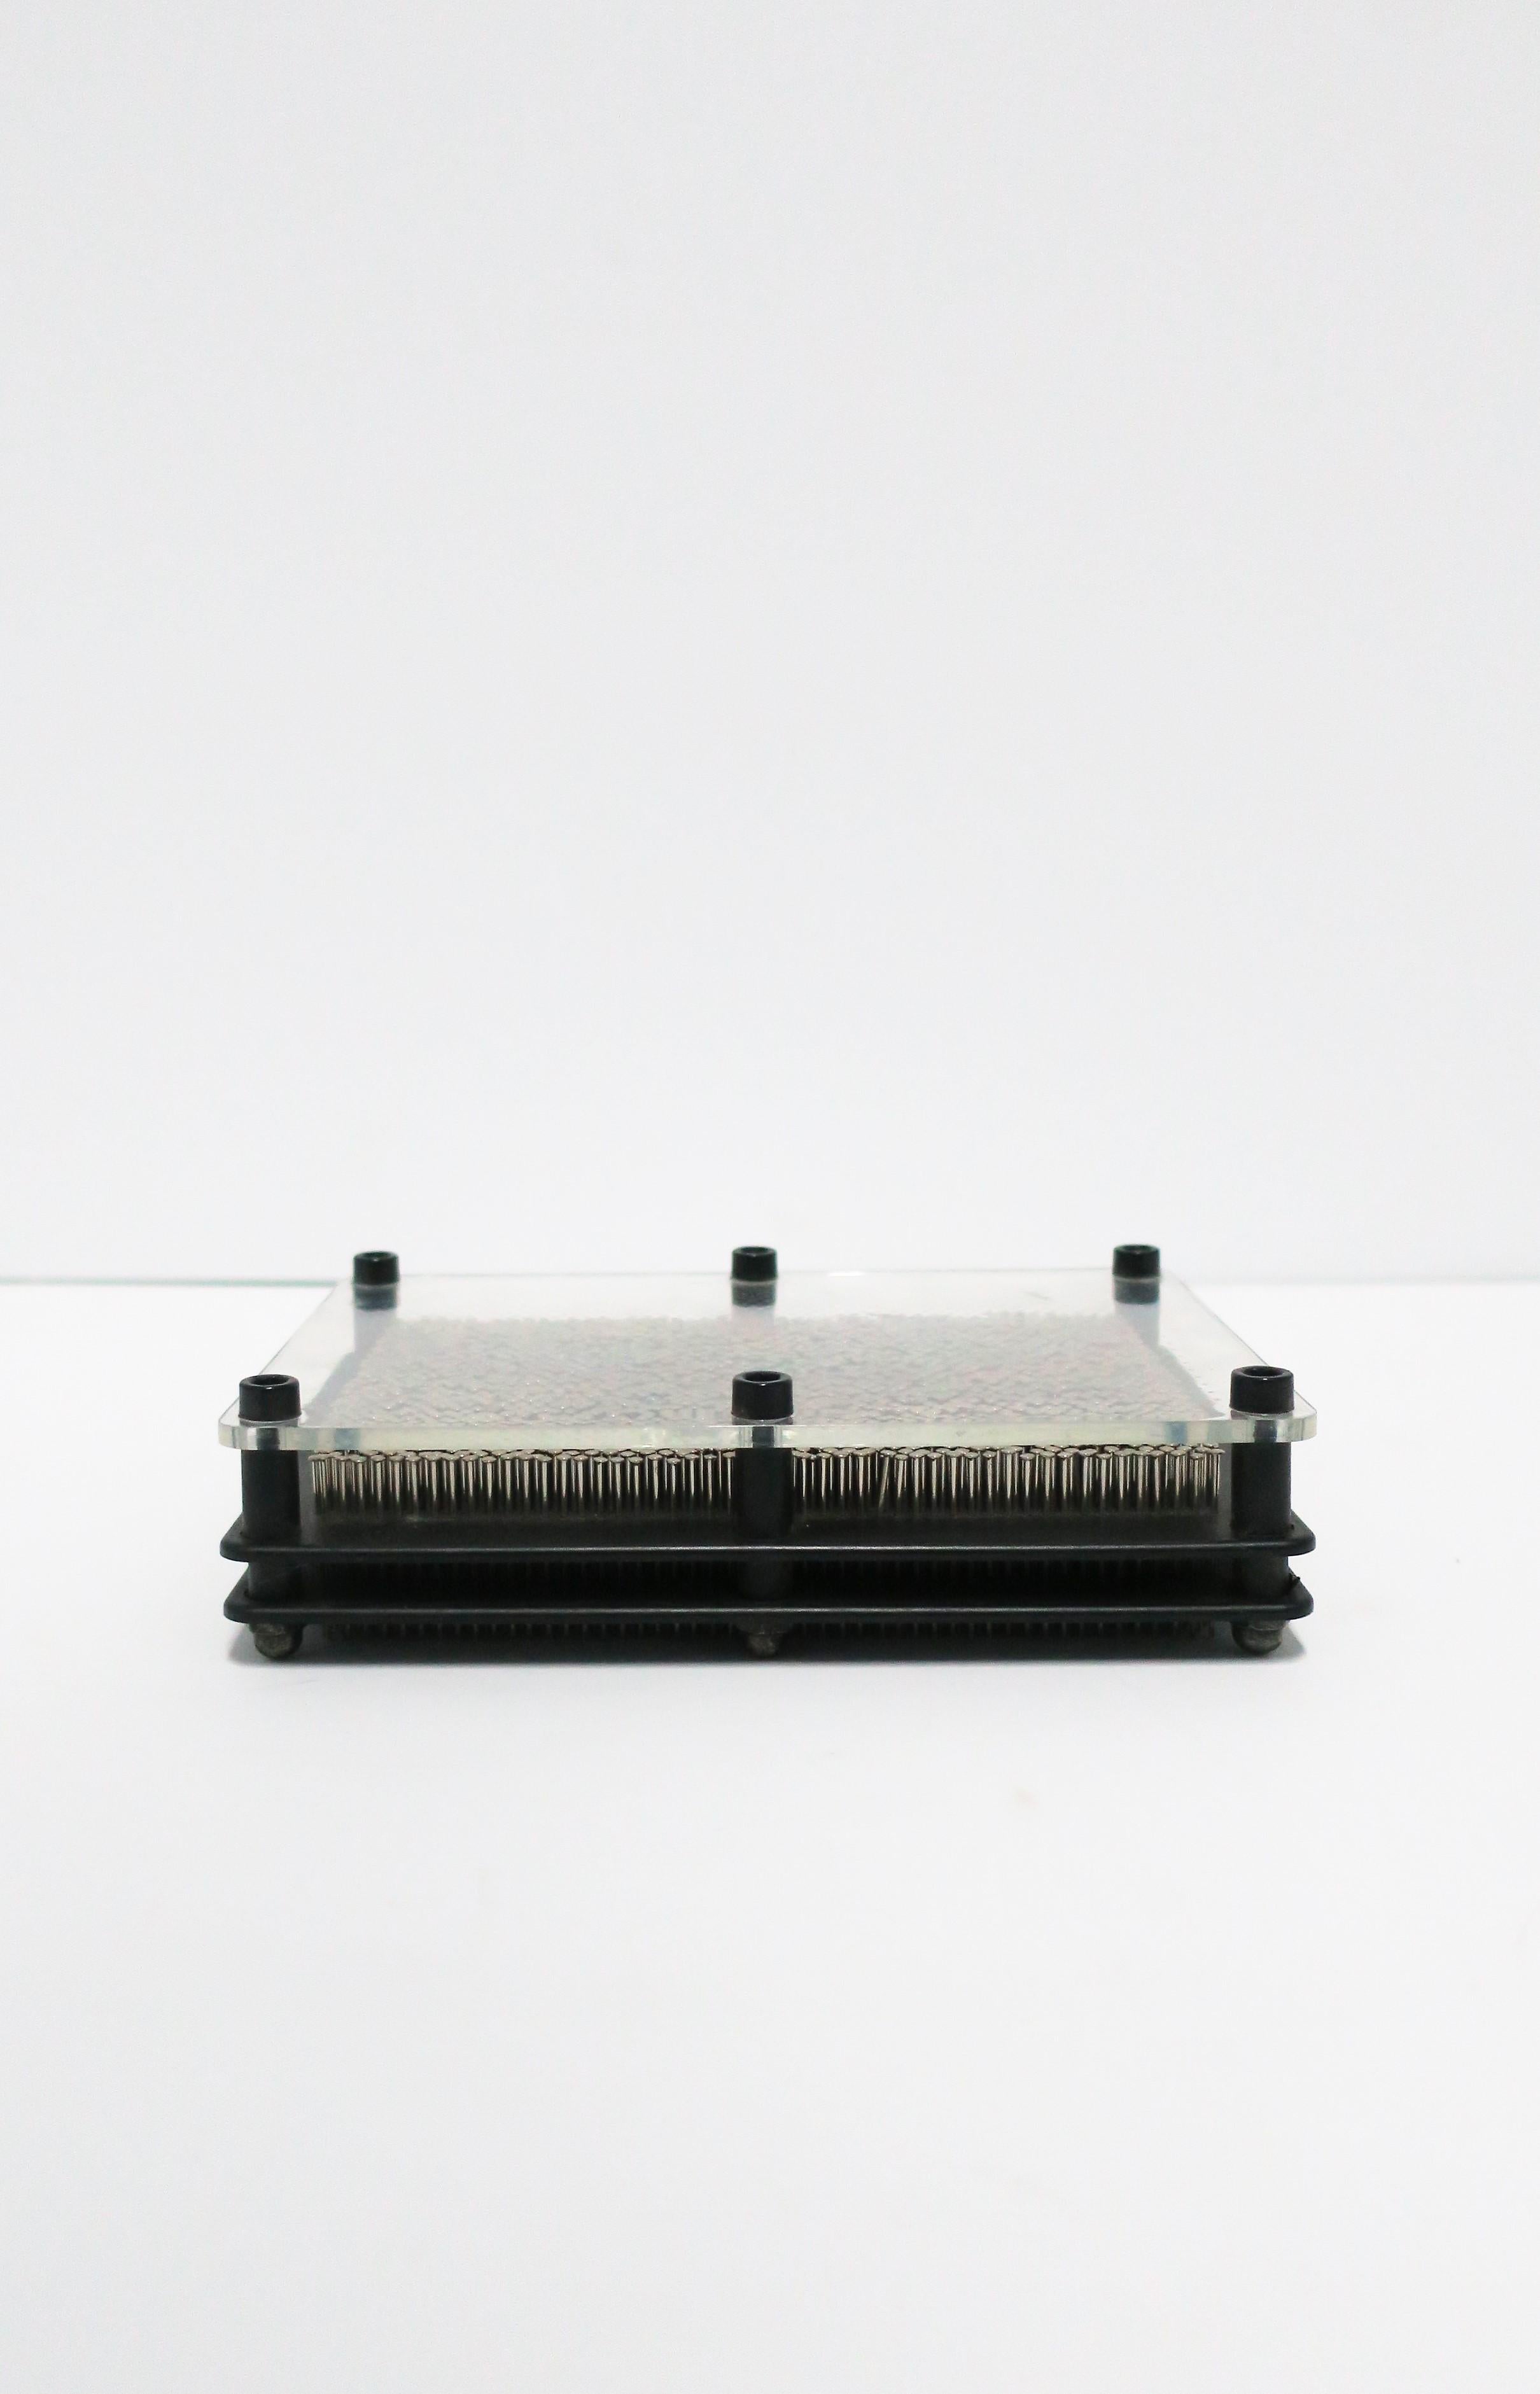 A Postmodern period black metal and clear acrylic with steel nails decorative object, circa late-20th century. Piece is rectangular in shape, comprised of three pieces acrylic (black and clear), black metal screws and thin metal nails (approximately